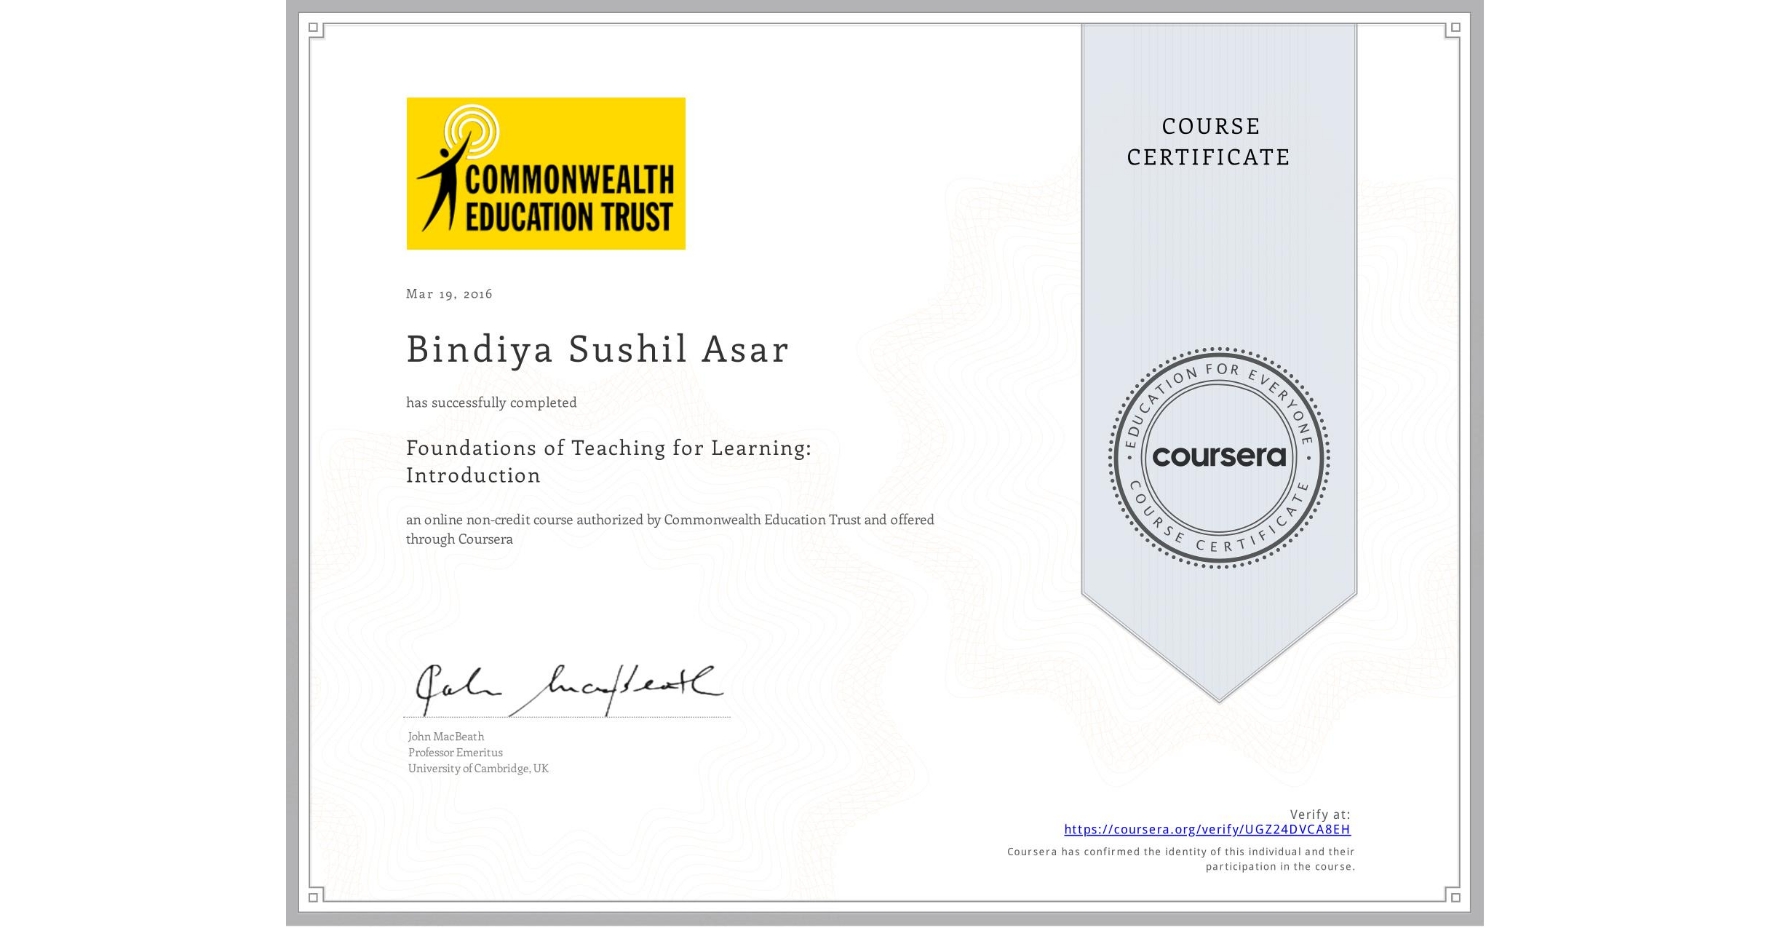 View certificate for Bindiya Sushil Asar, Foundations of Teaching for Learning: Introduction, an online non-credit course authorized by Commonwealth Education Trust and offered through Coursera